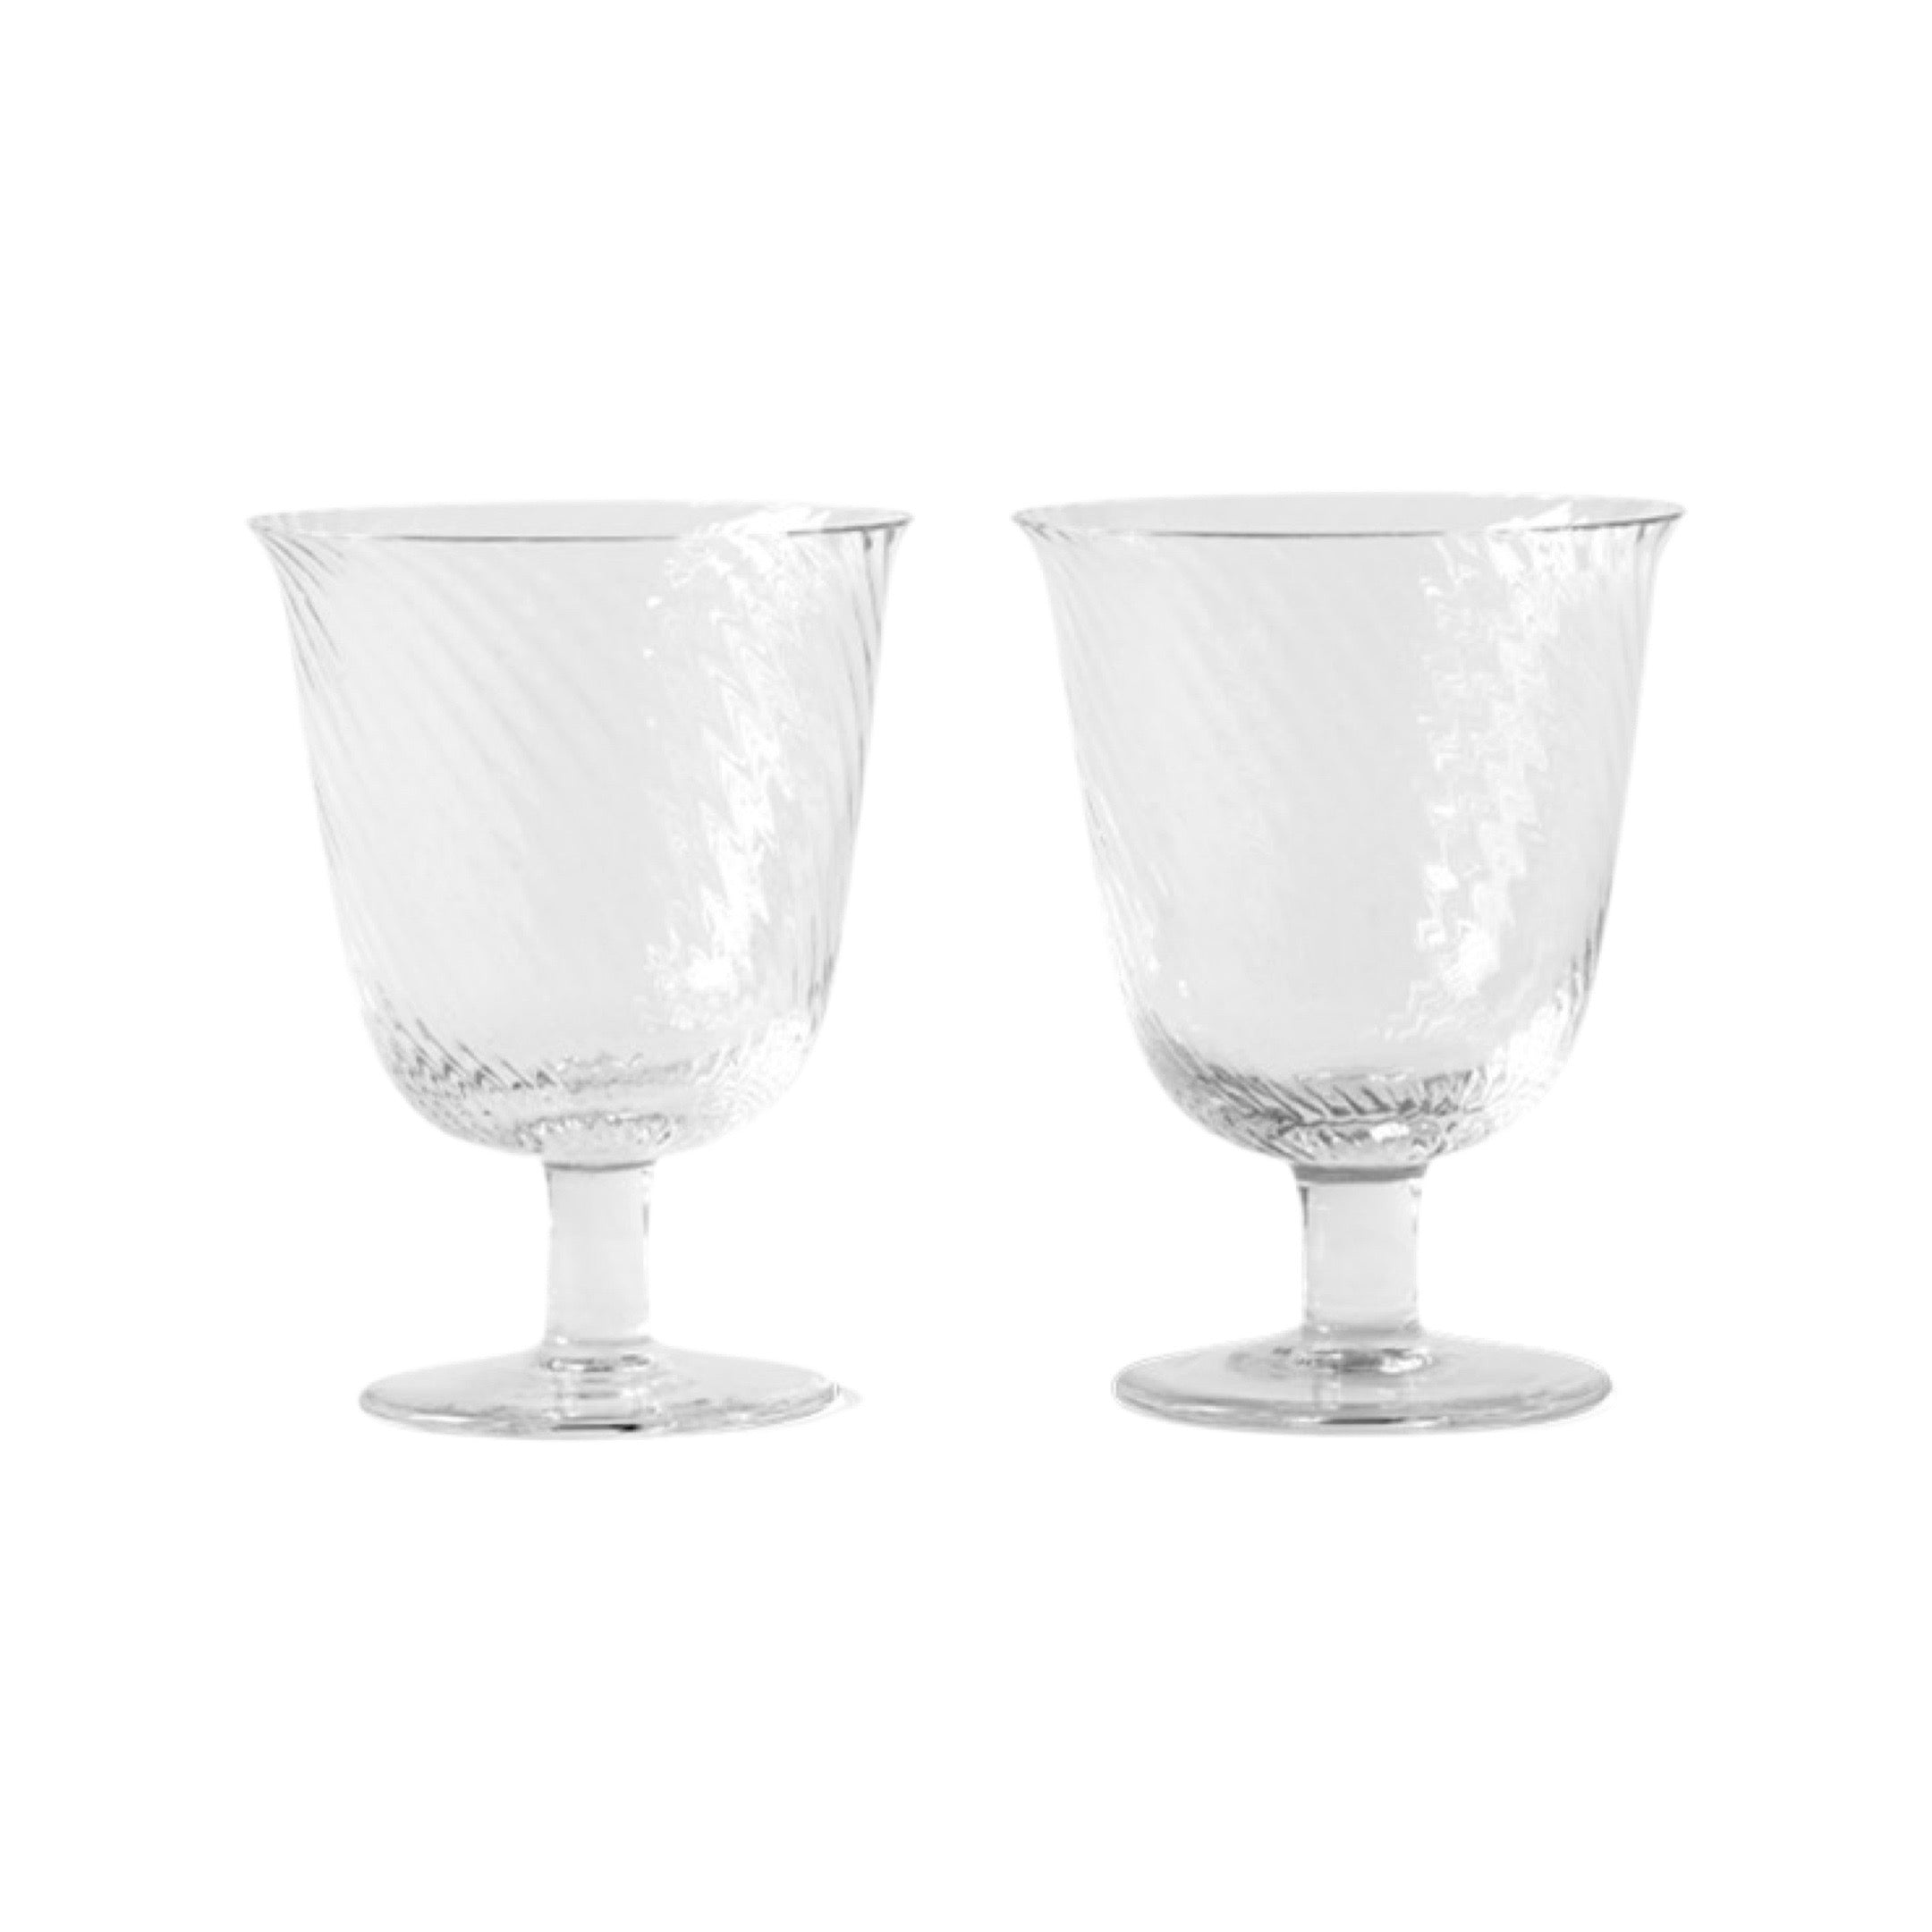 &Tradition Collect SC79 Wine Glass - Low (Set of 2)